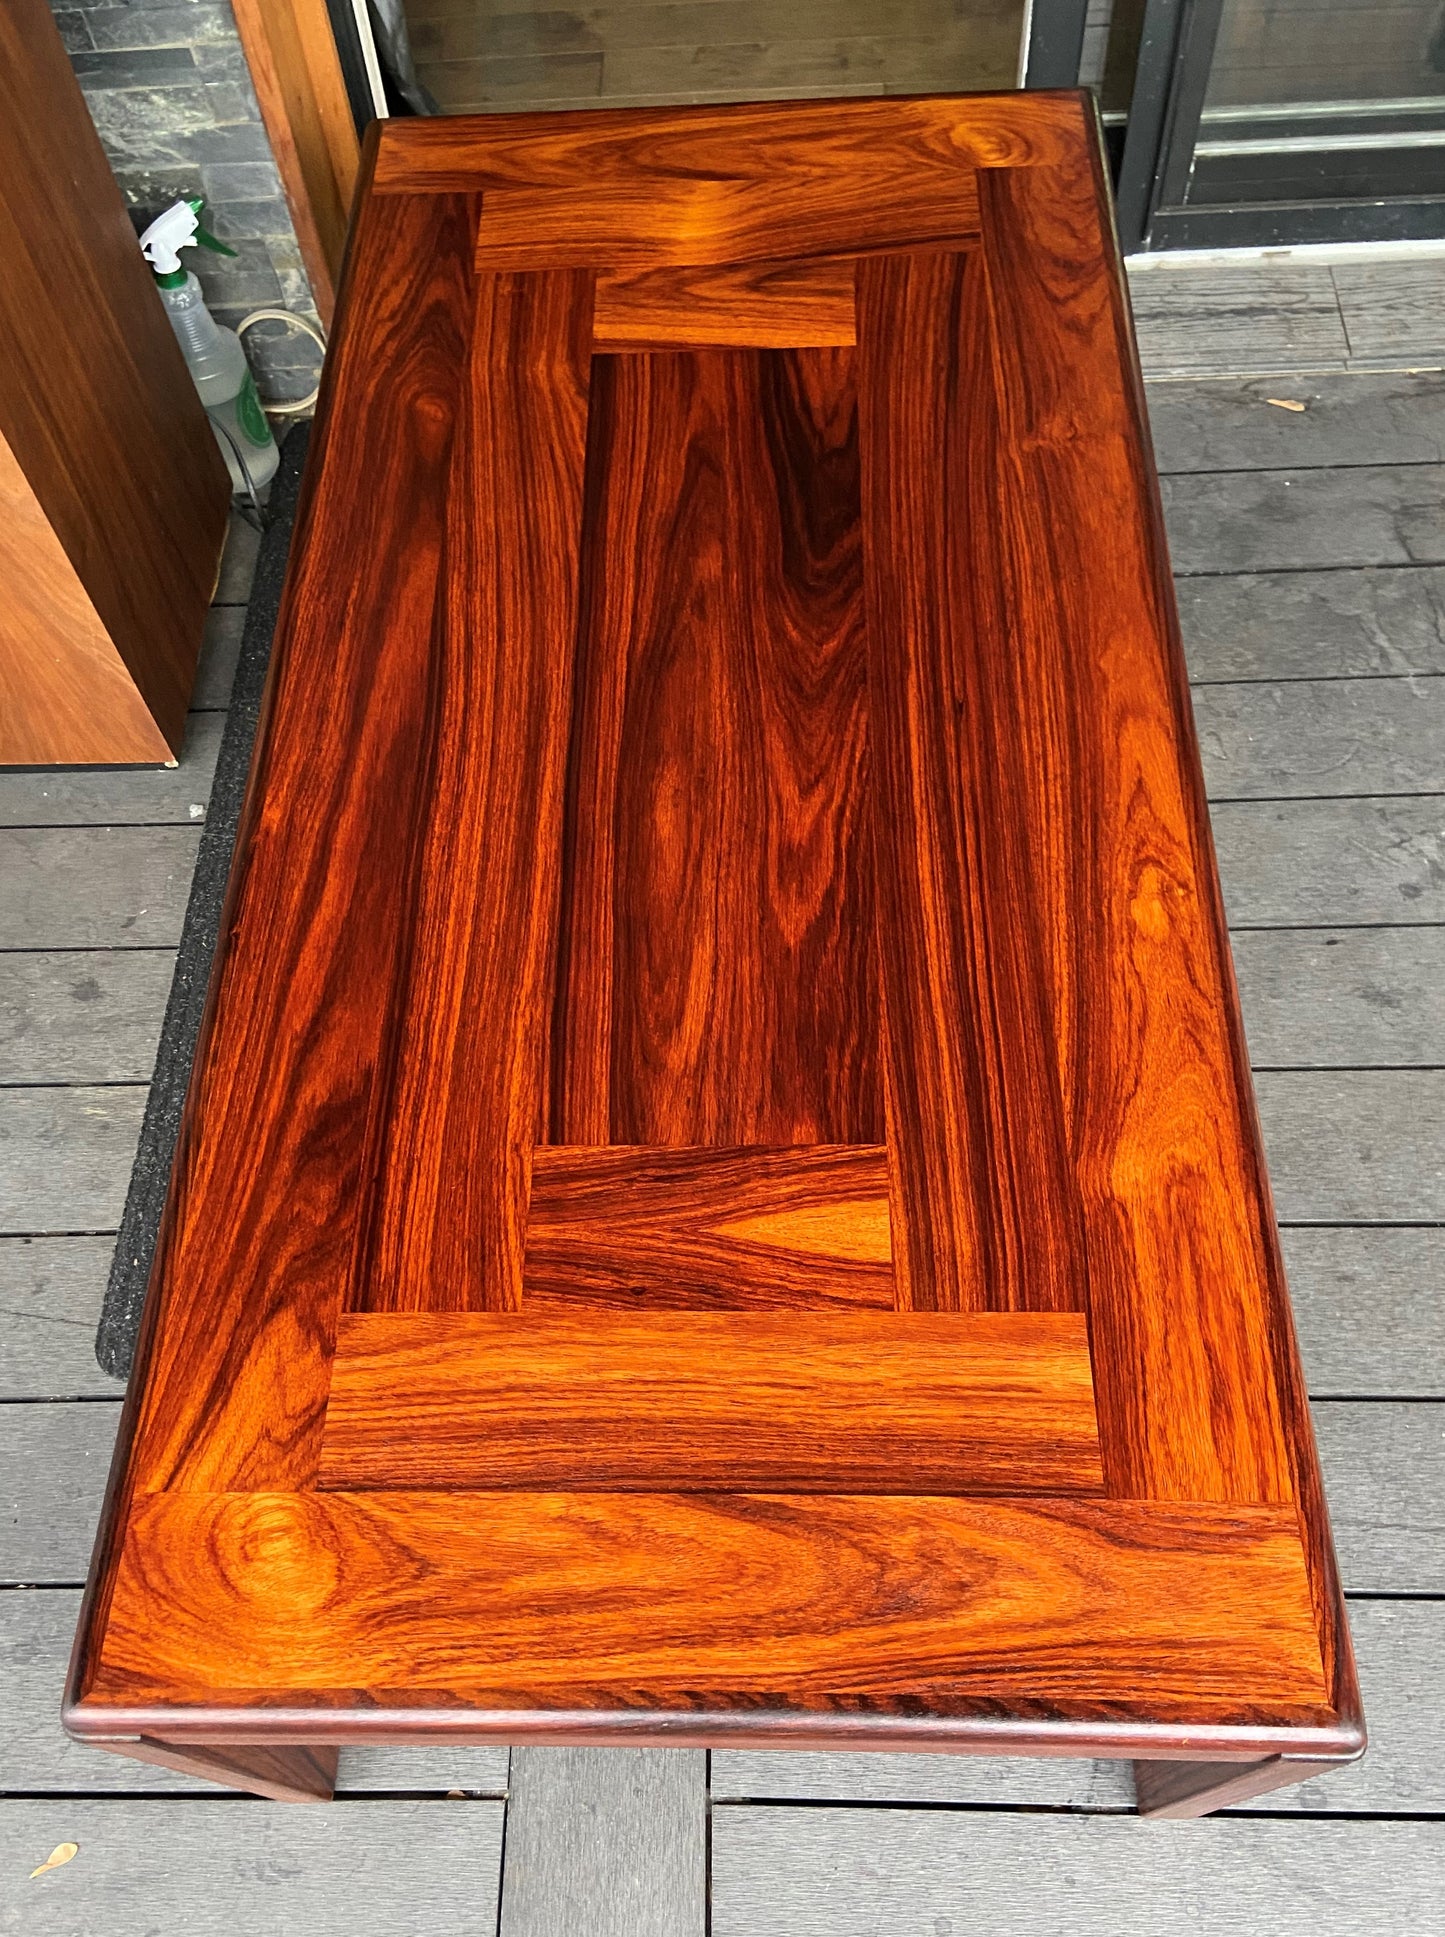 REFINISHED Danish MCM Rosewood Coffee Table by H. Kjaernulf, PERFECT